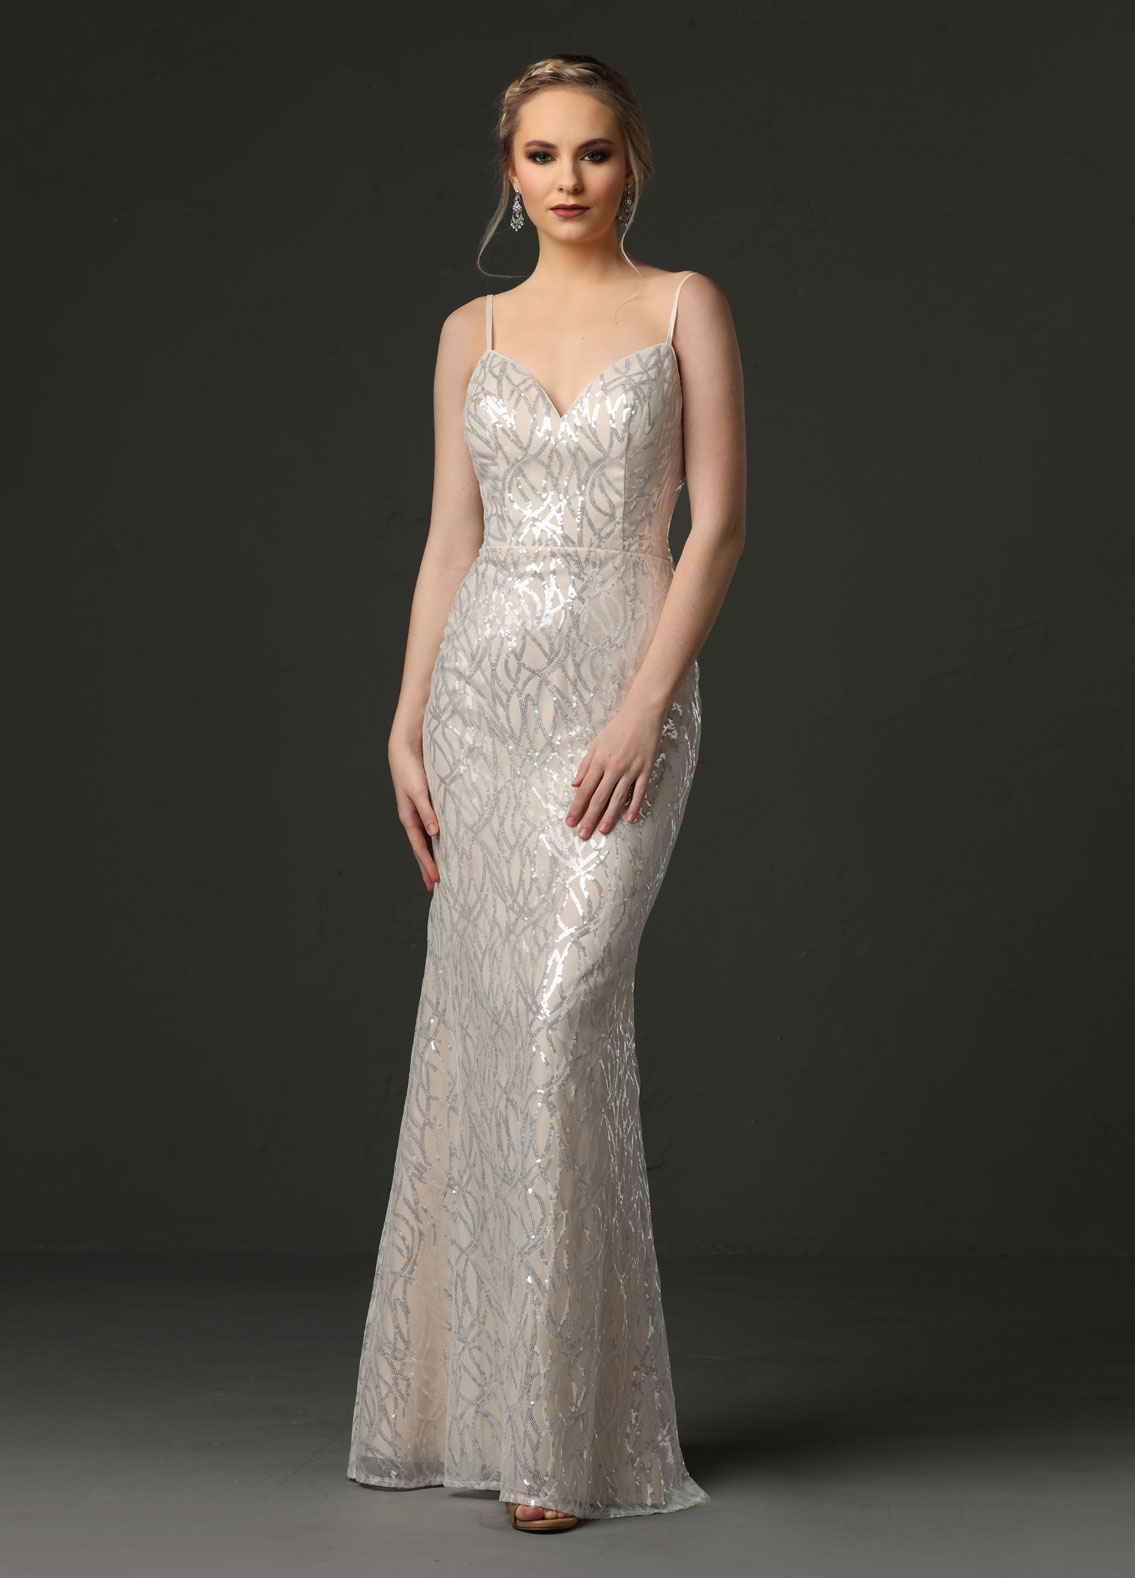 Bridesmaids - Jocelyn Taylor Bridal and Prom | Bridal and Prom Dresses ...